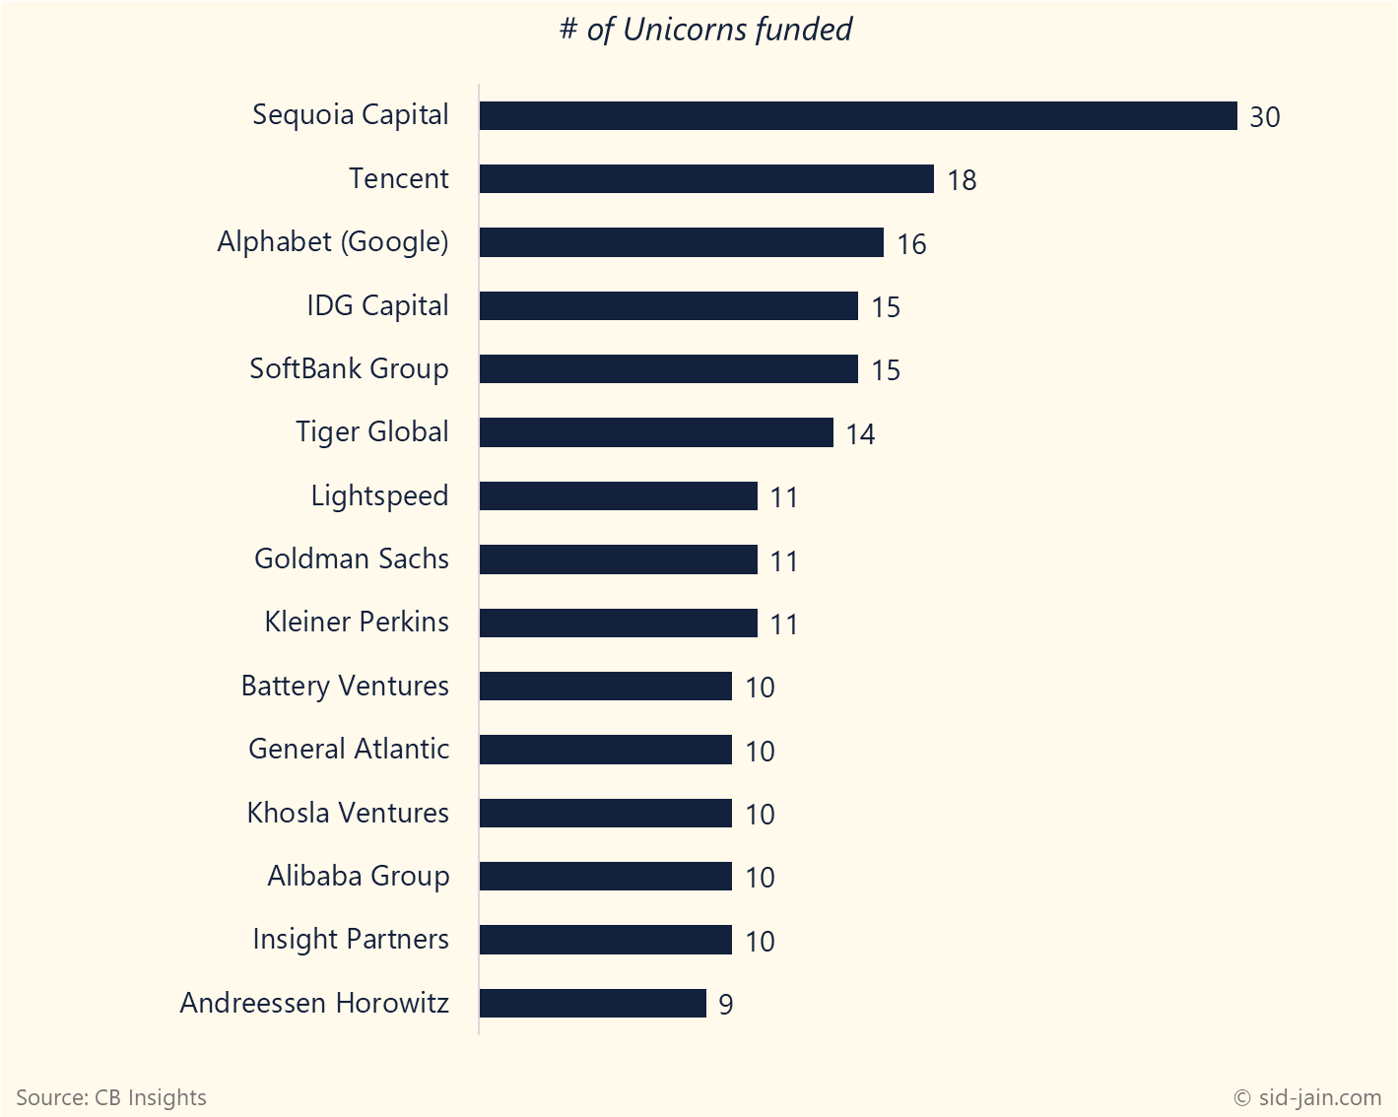 Investors who funded most unicorns